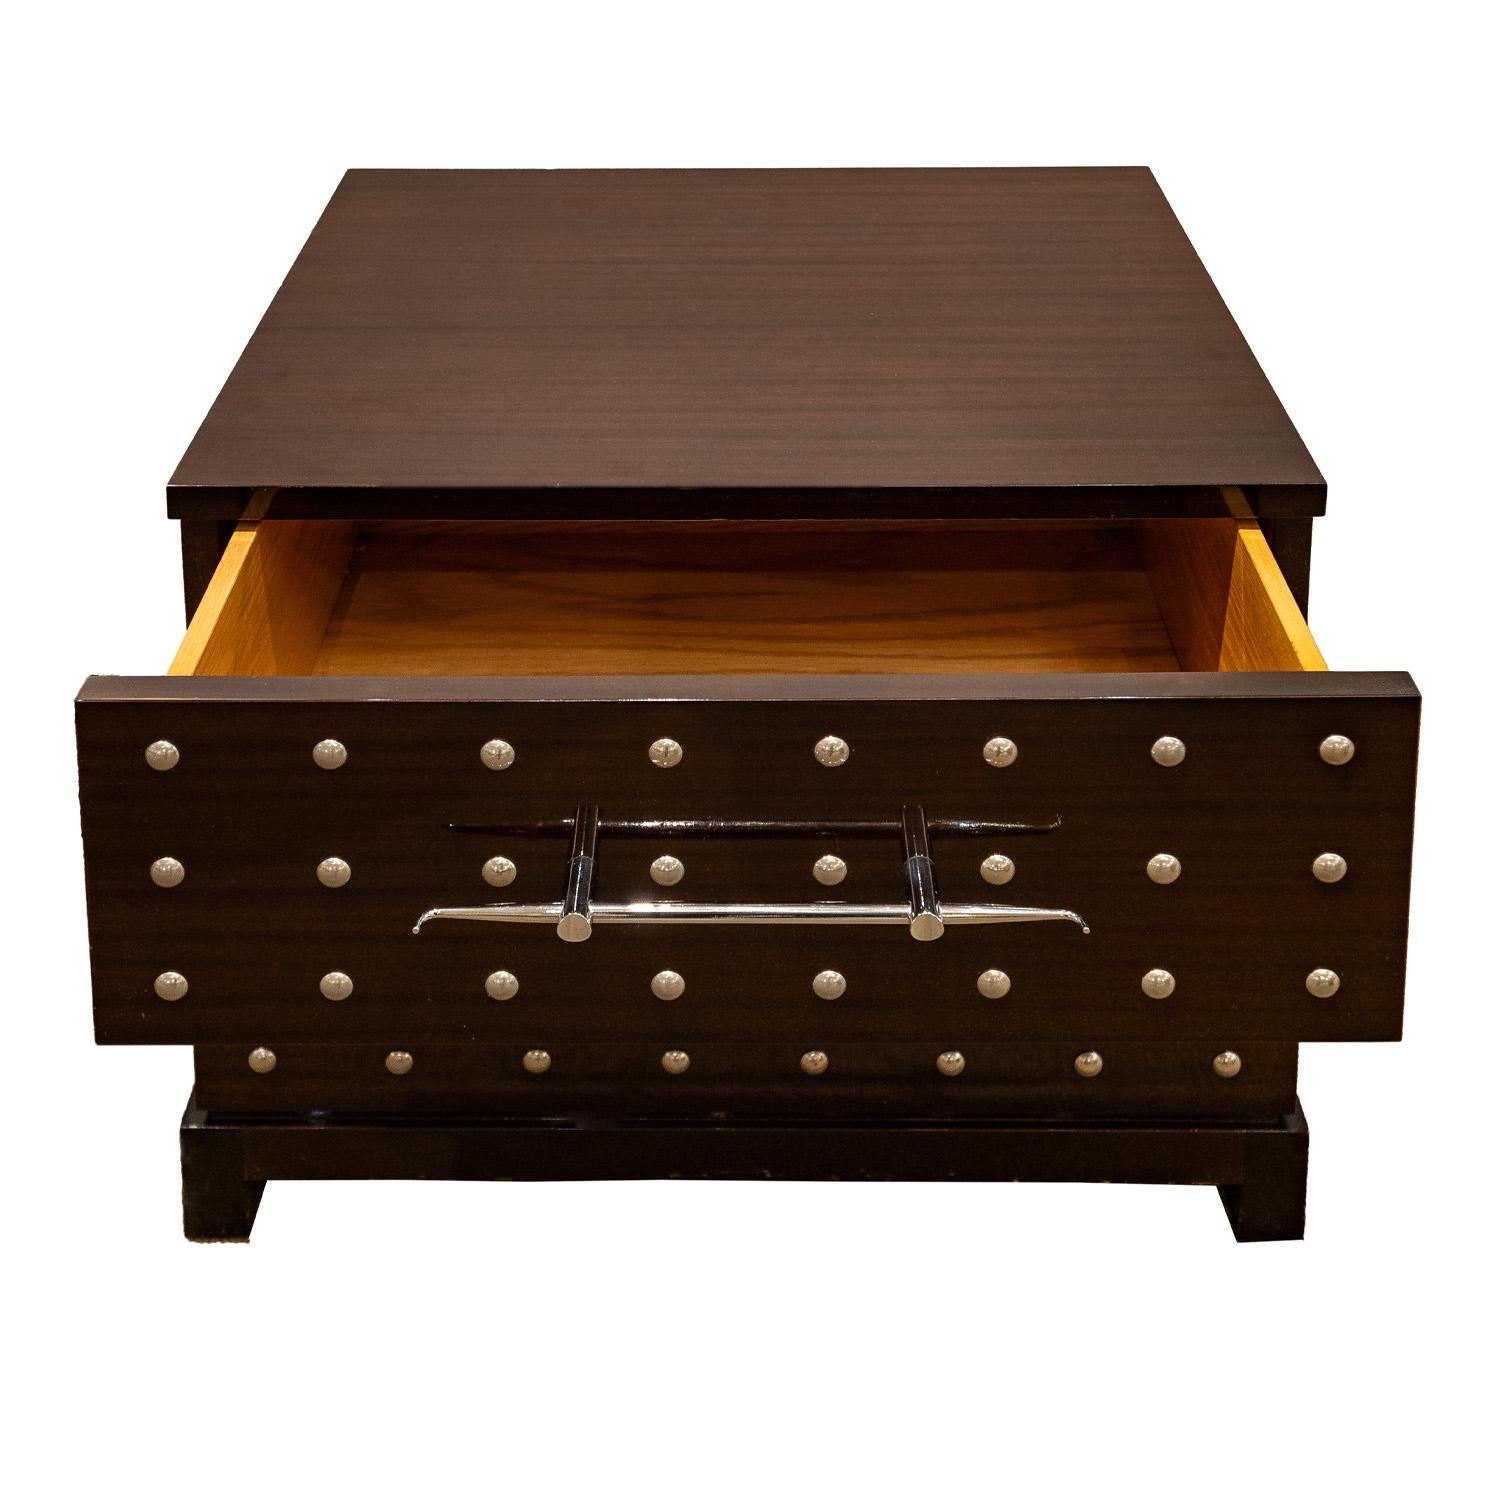 Hand-Crafted Tommi Parzinger Iconic Studded Small Chest/Bedside Table 1981